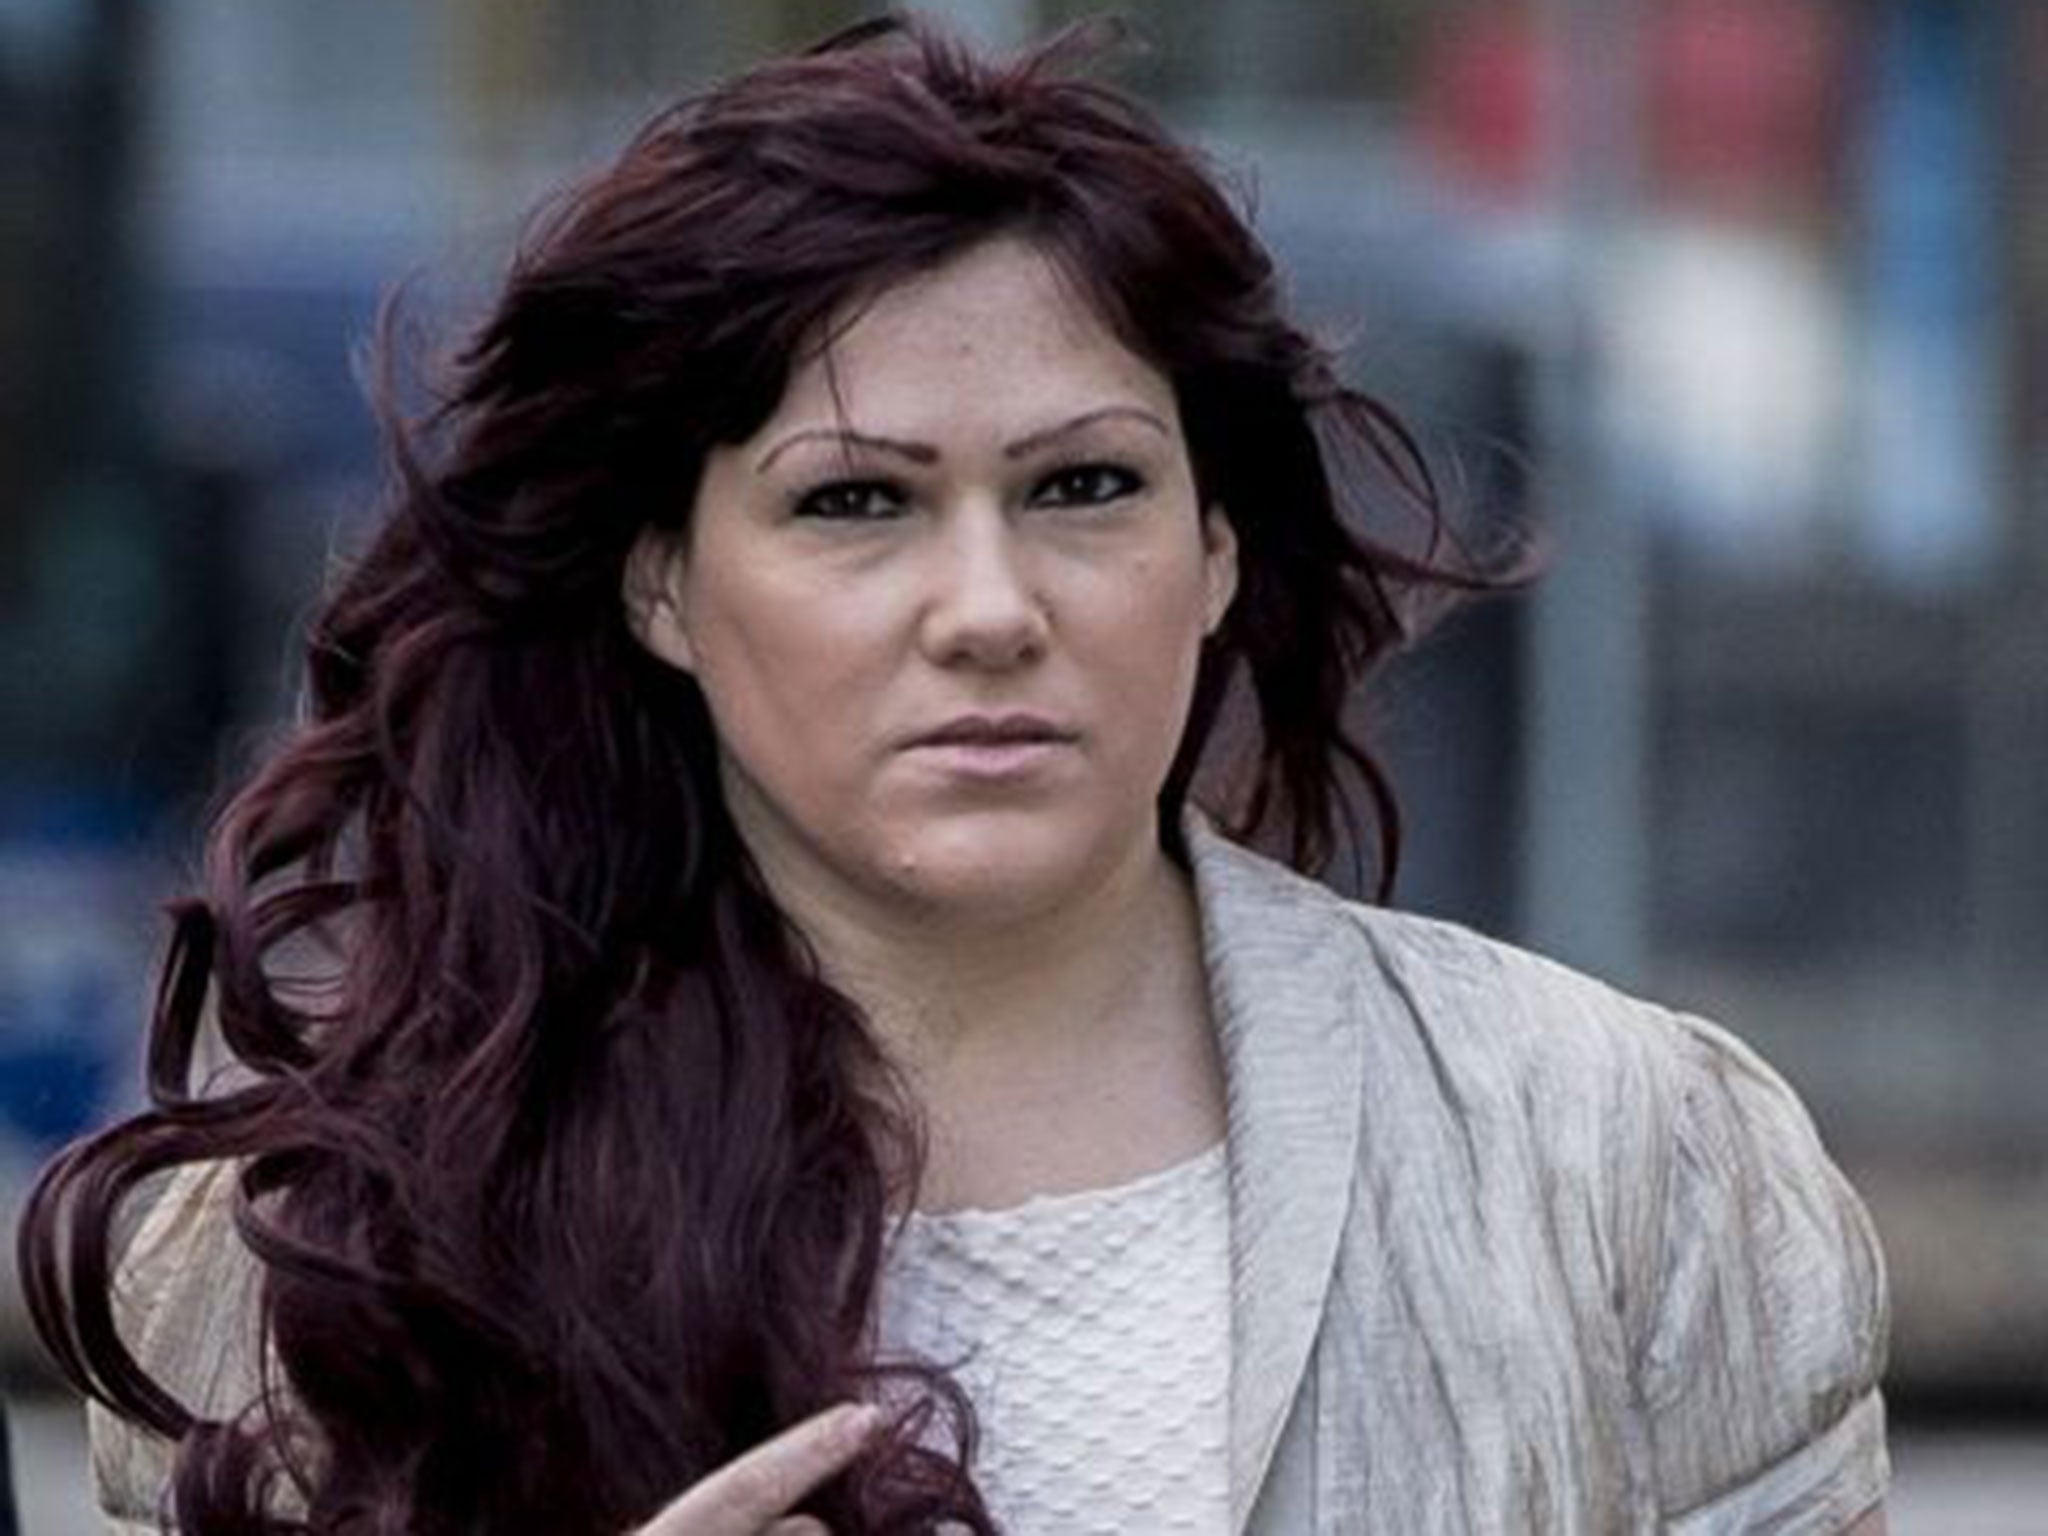 Ian Watkins trial Singers ex-girlfriend Joanne Mjadzelics took mother of baby he wanted to rape to police, court told The Independent The Independent pic